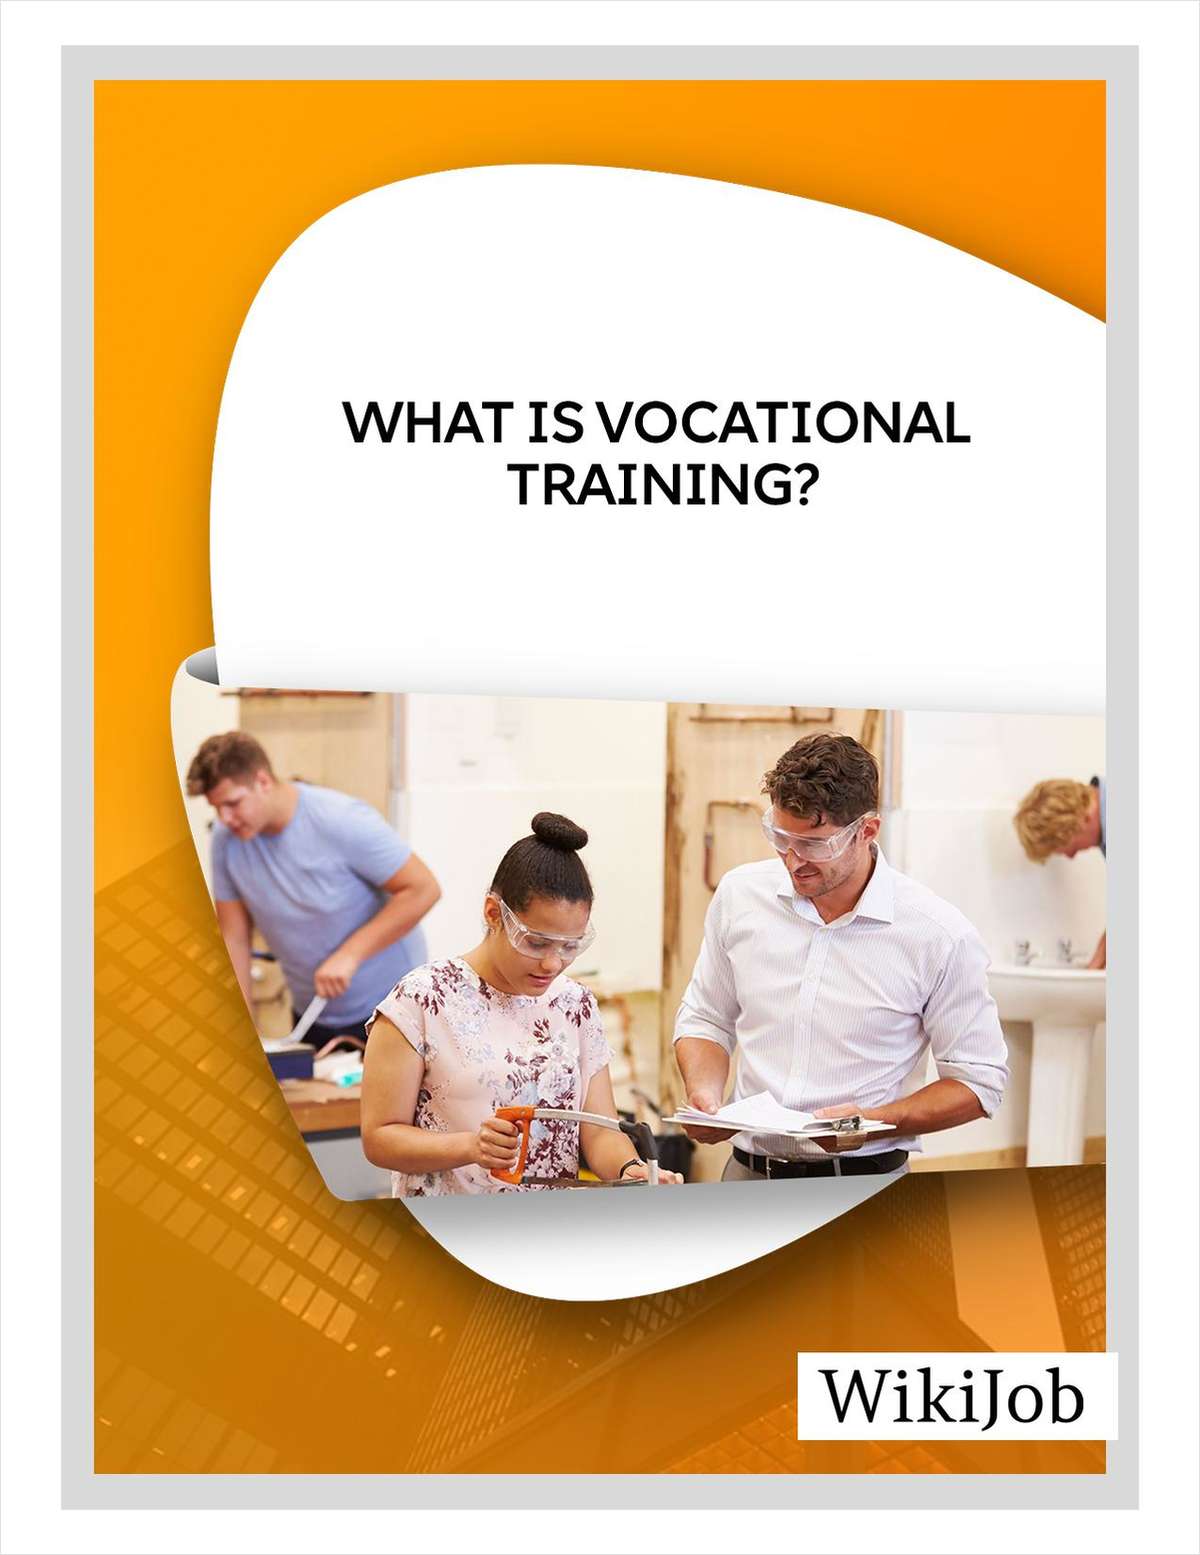 What Is Vocational Training?